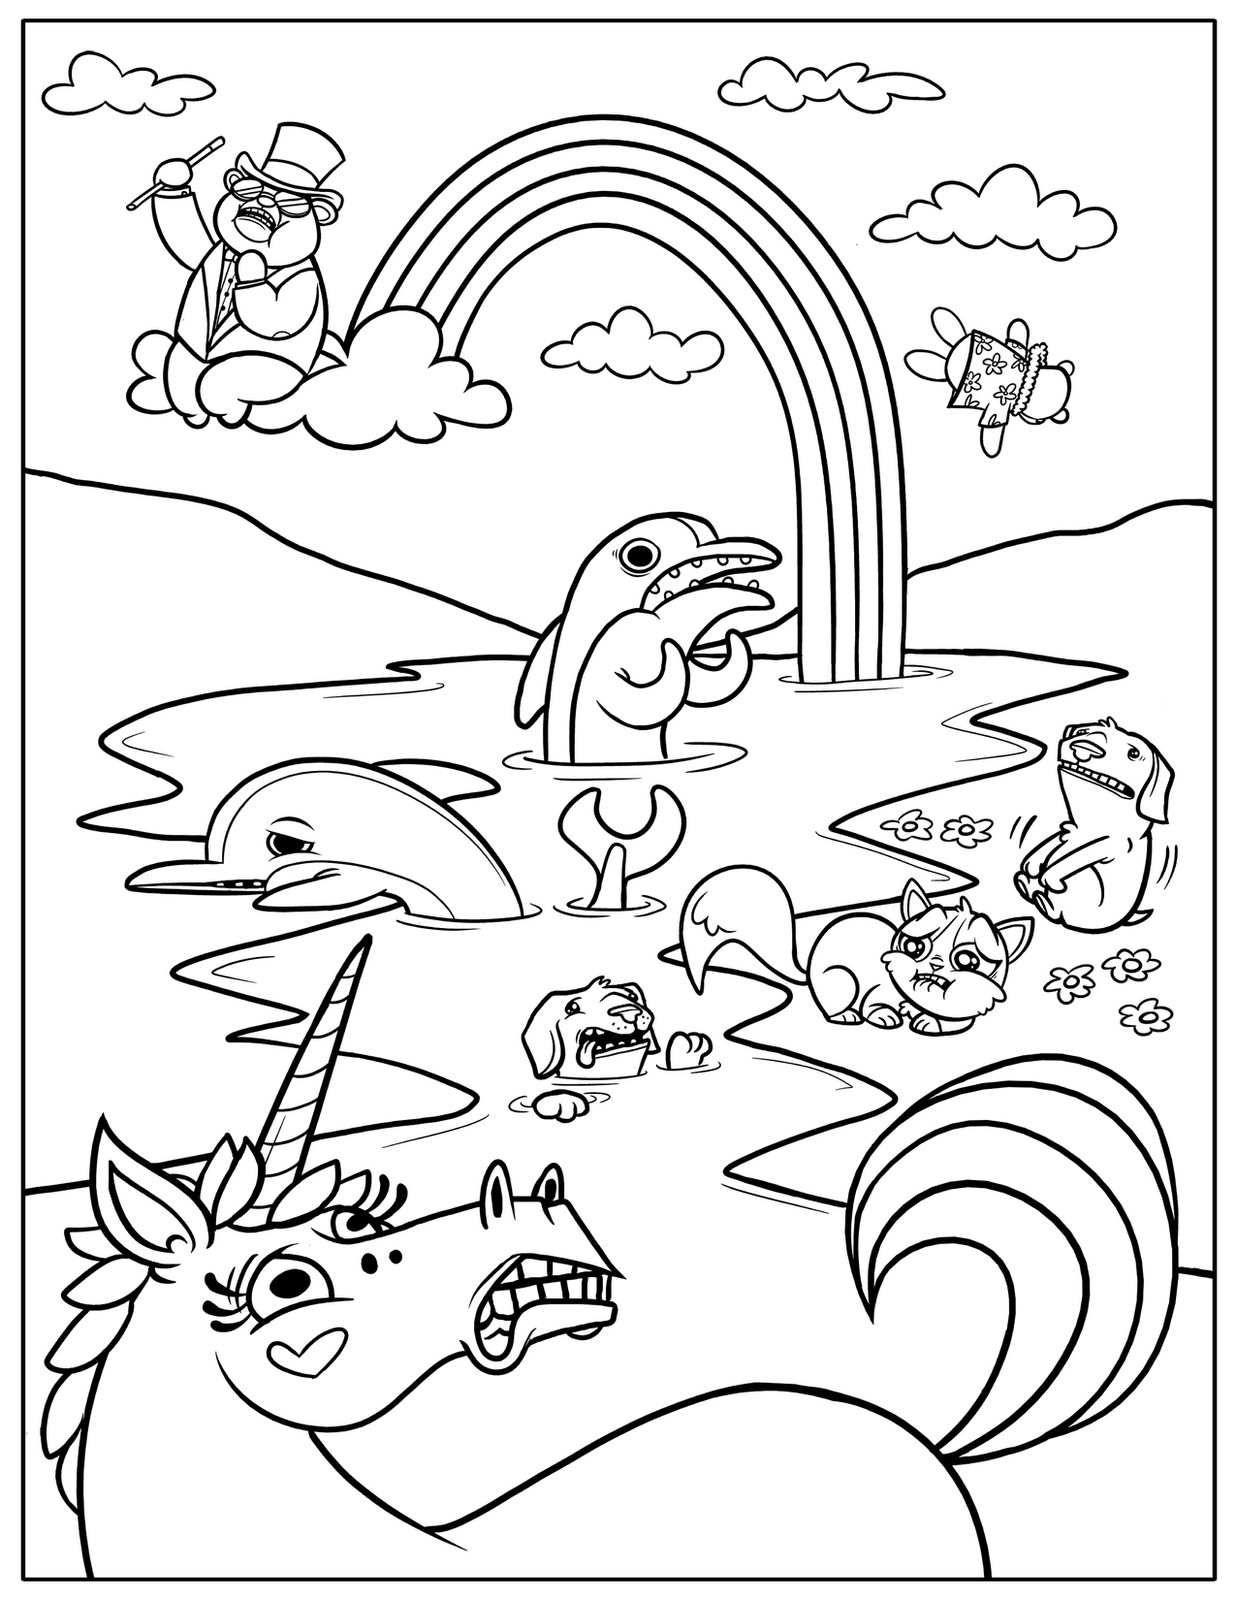 Coloring Pages Of Kids
 Free Printable Rainbow Coloring Pages For Kids